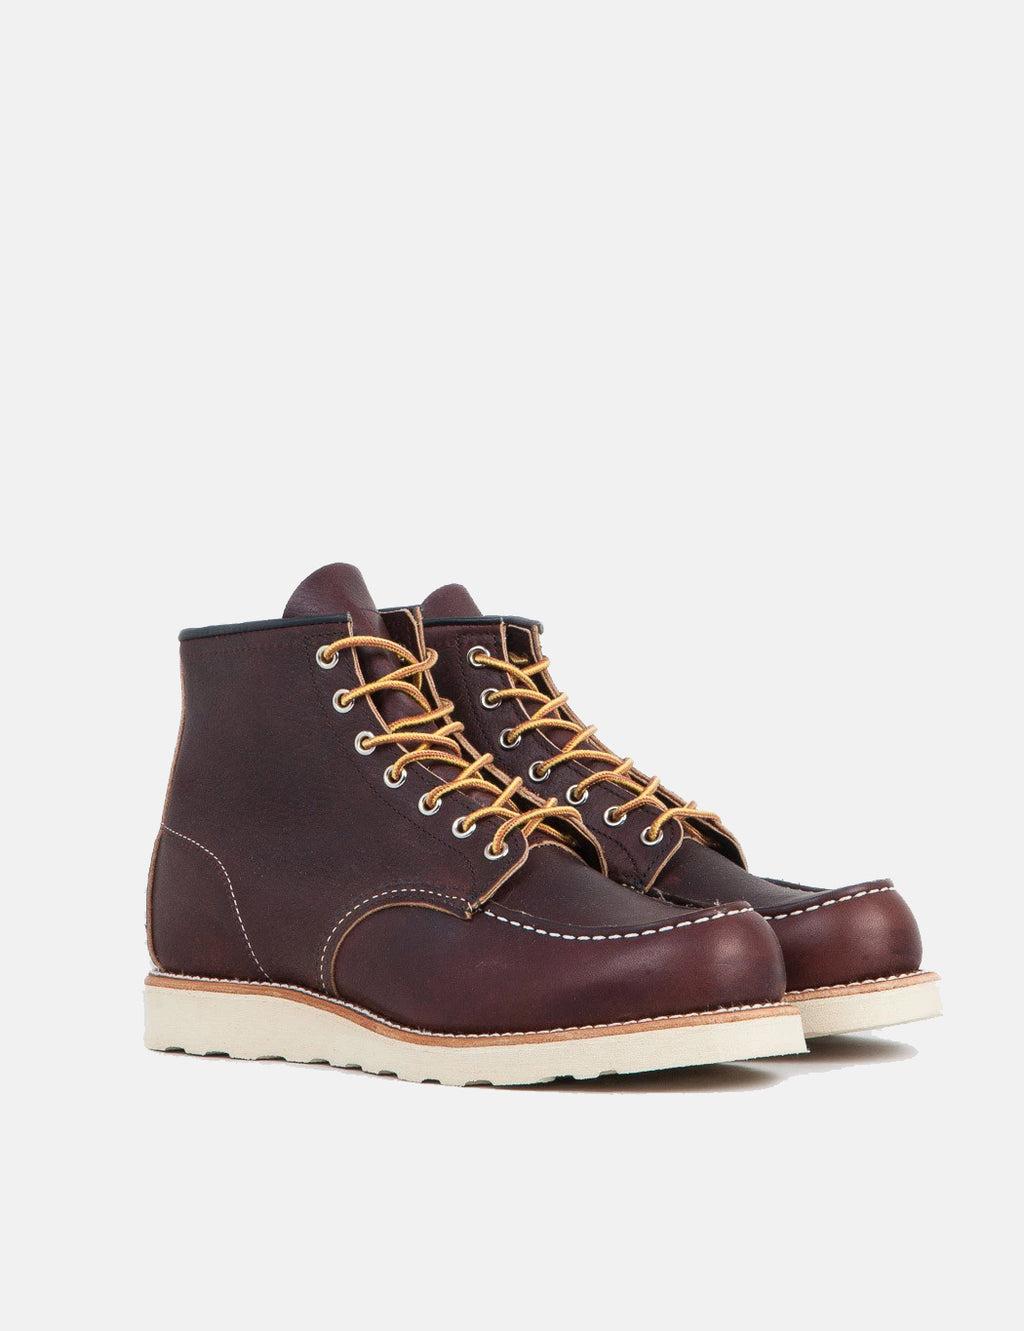 Red Wing 6 Moc Toe Work Boots 8138 Brown Urbanexcess Com Urban Excess